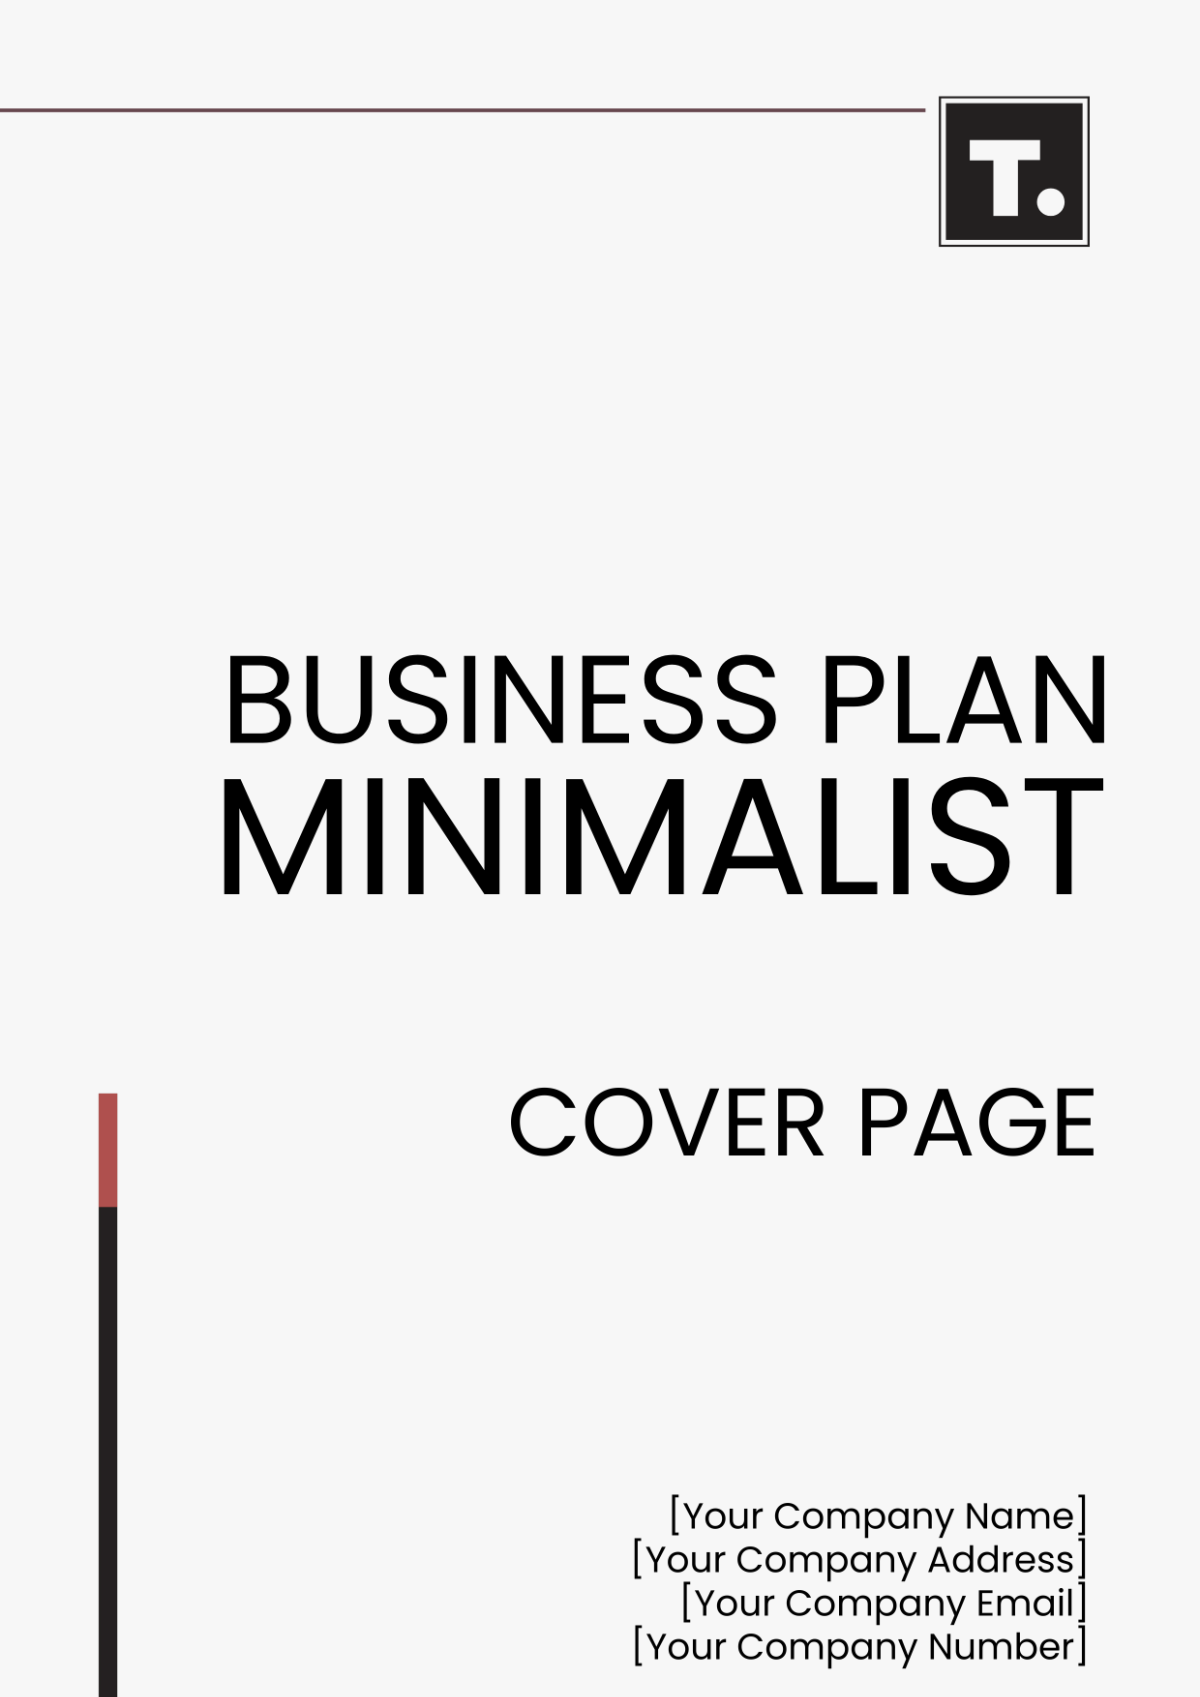 Business Plan Minimalist Cover Page